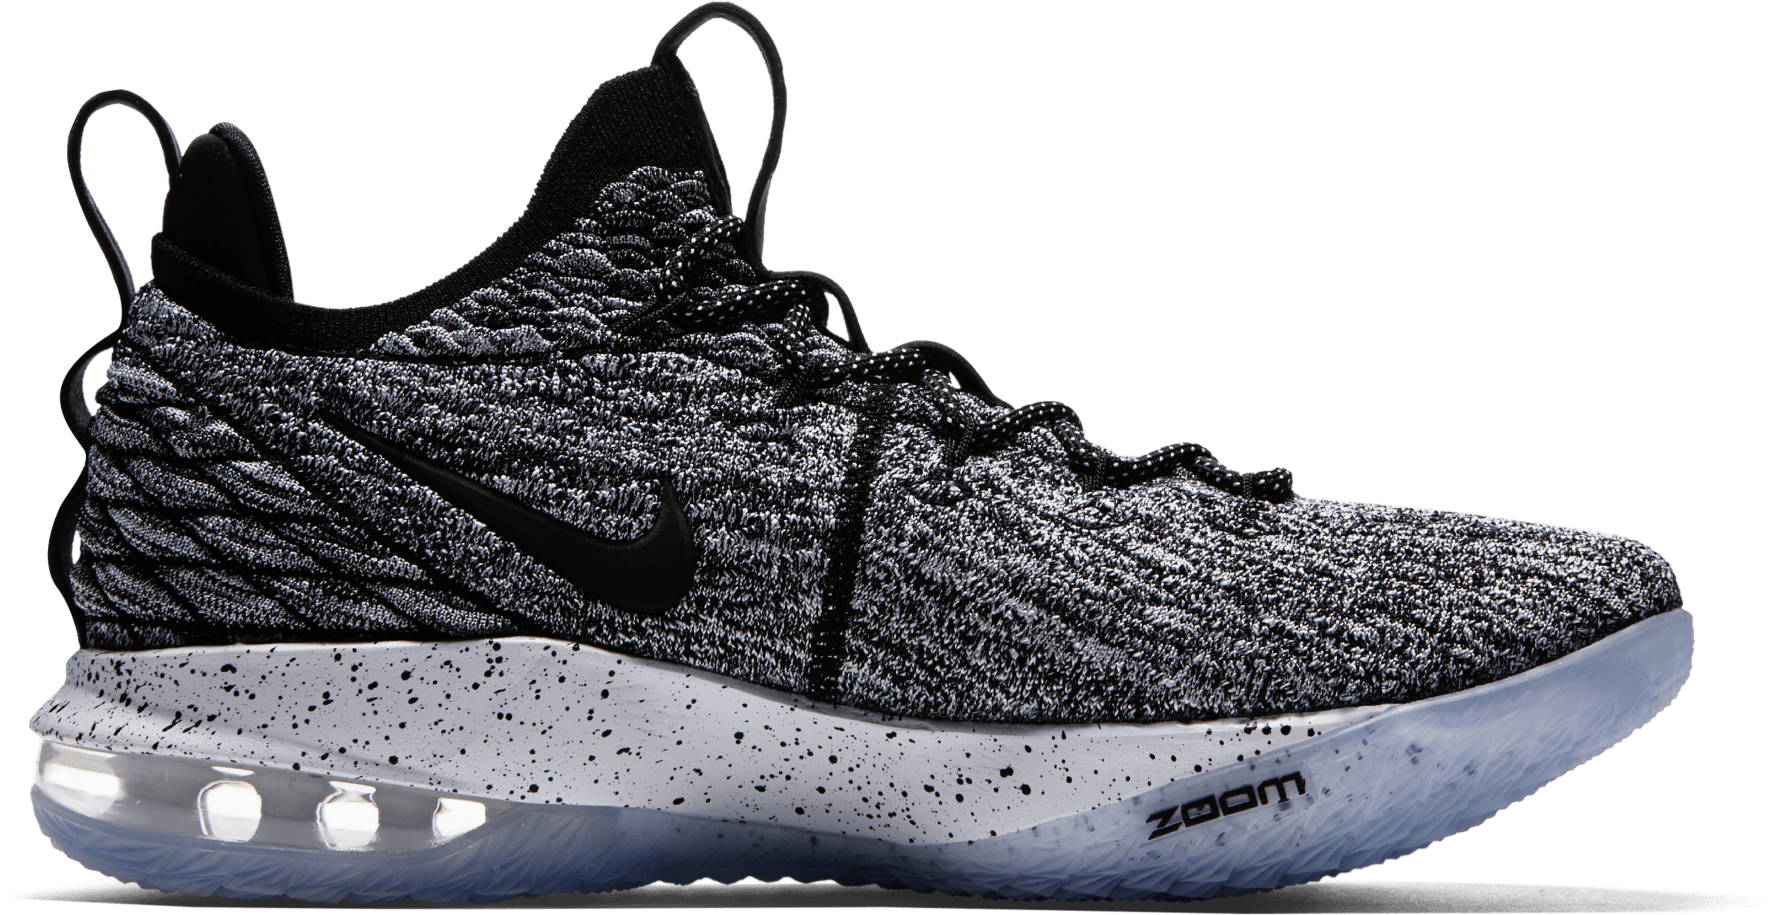 nike lebron 15 low review